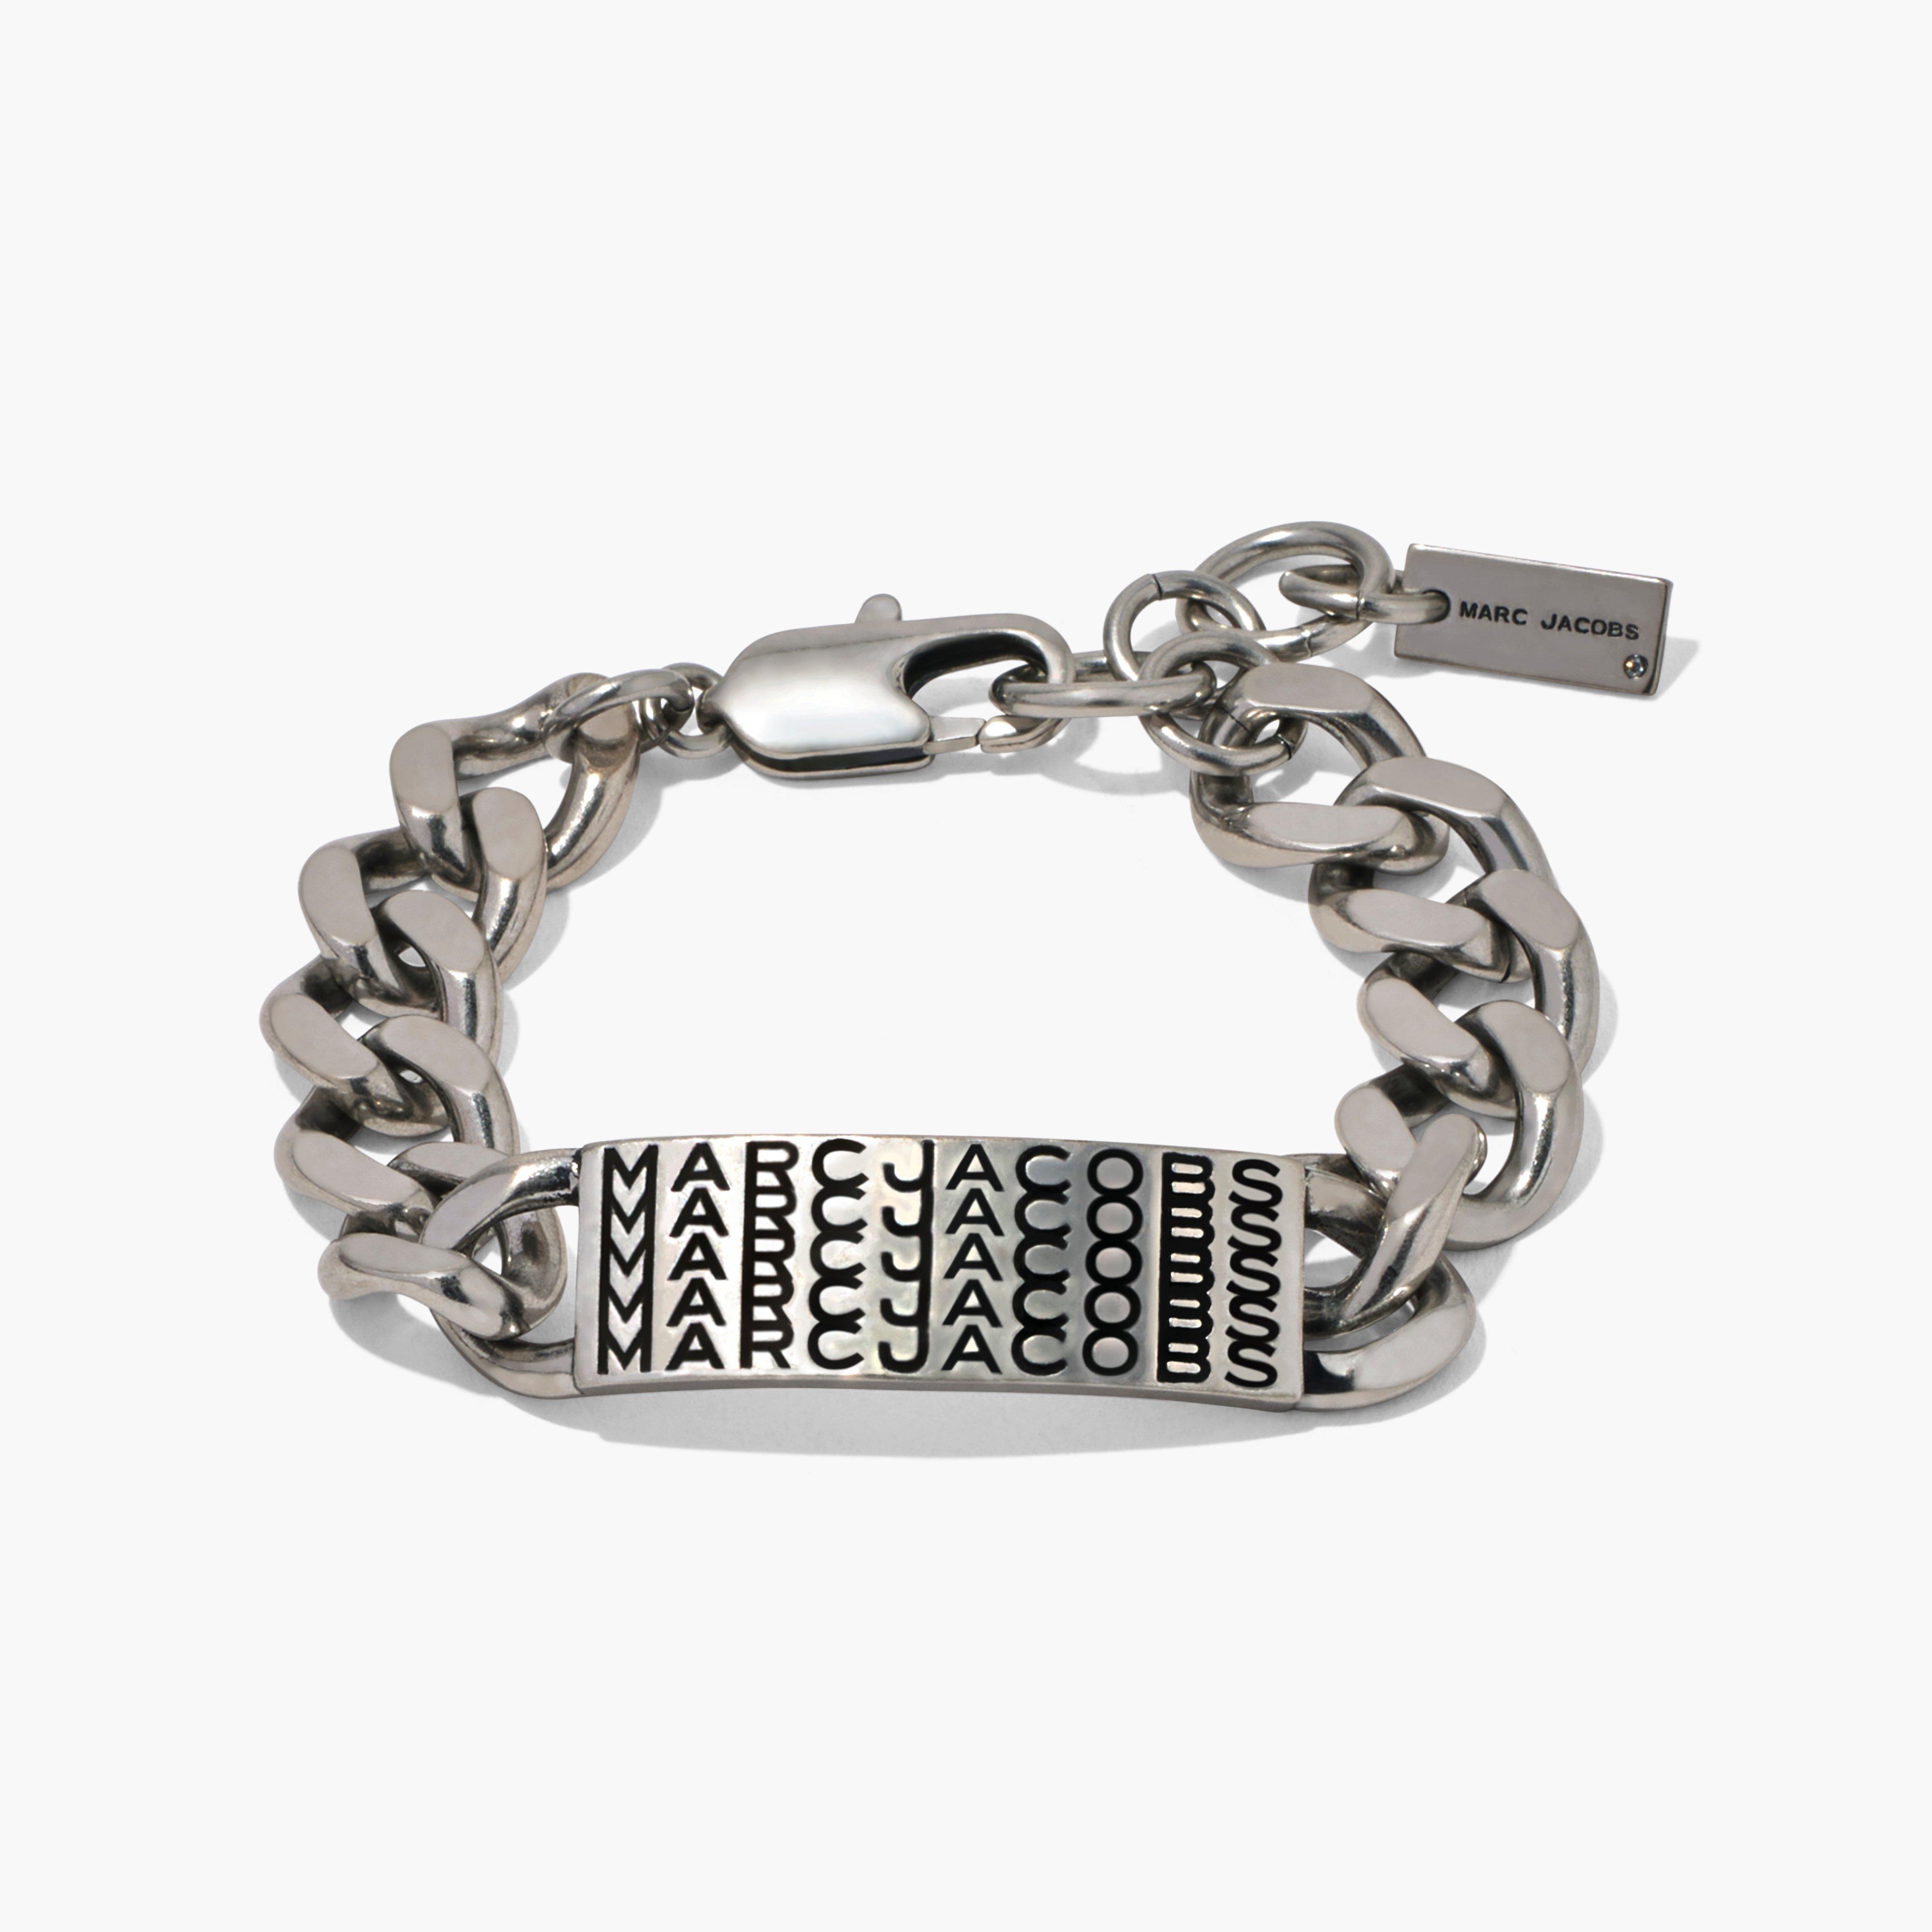 Marc by Marc jacobs The Barcode Monogram ID Chain Bracelet,AGED SILVER